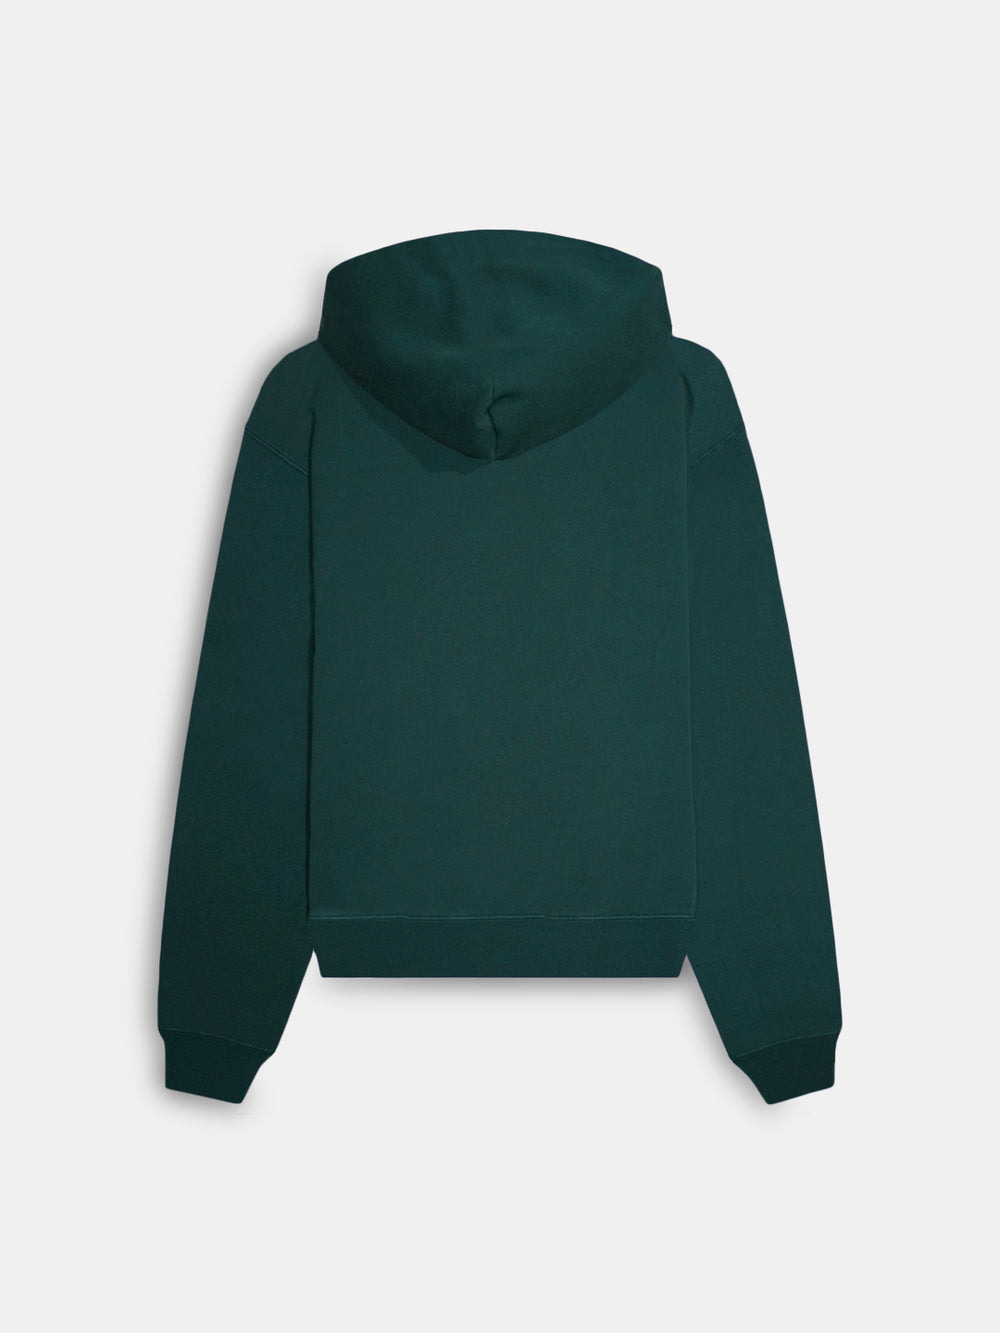 The Shop By Hand Fleece Hoodie Forest Green - Back